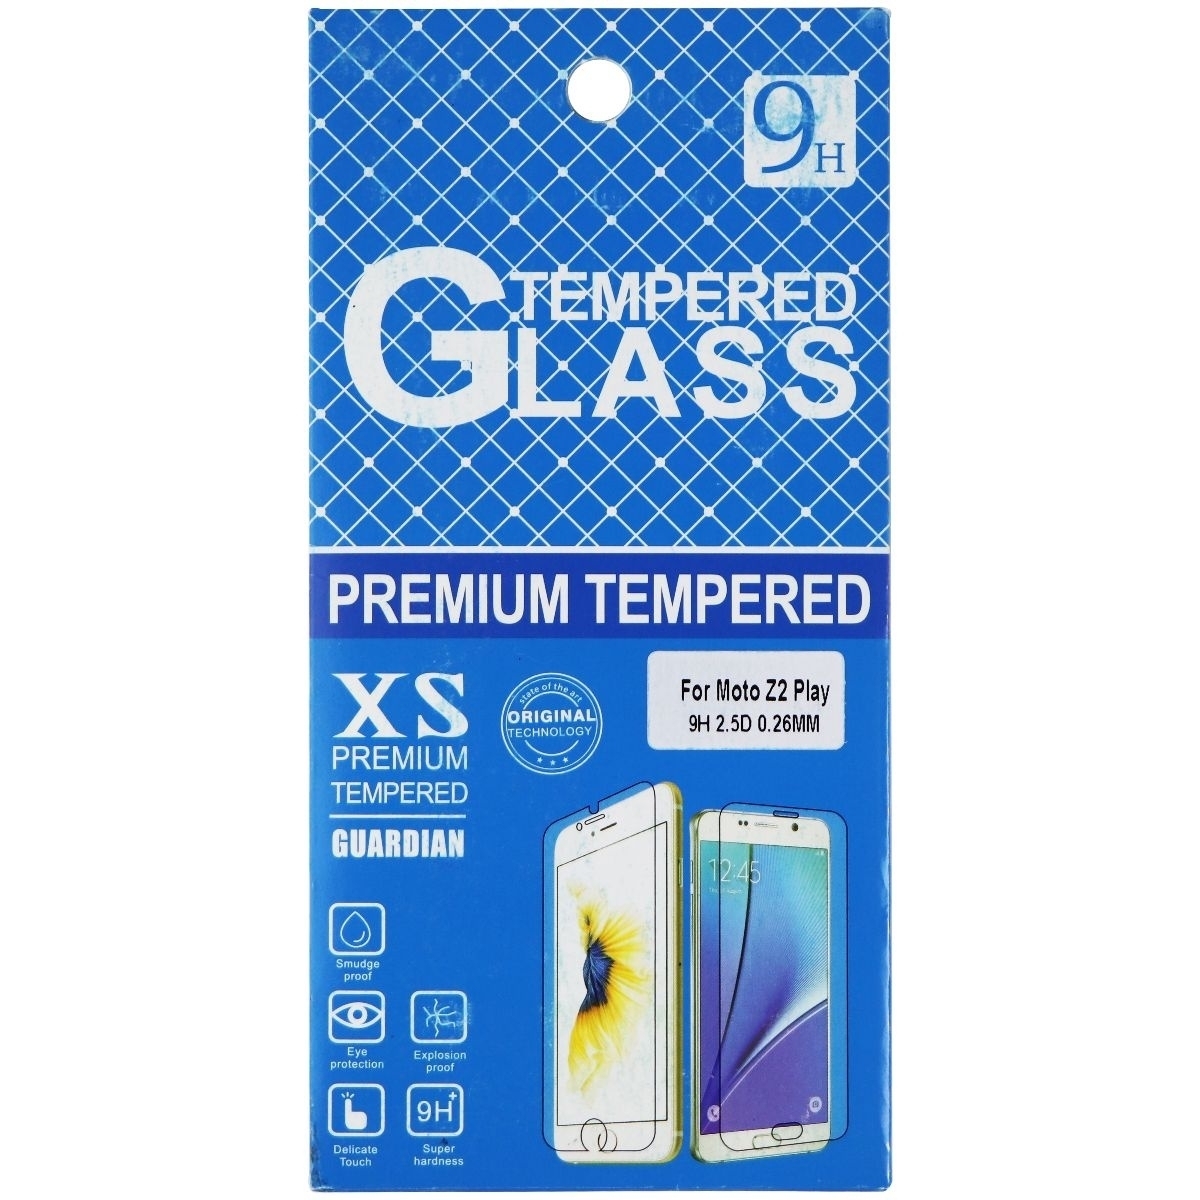 DHG Premium Guardian Tempered Glass For Motorola Moto Z2 Play - Clear